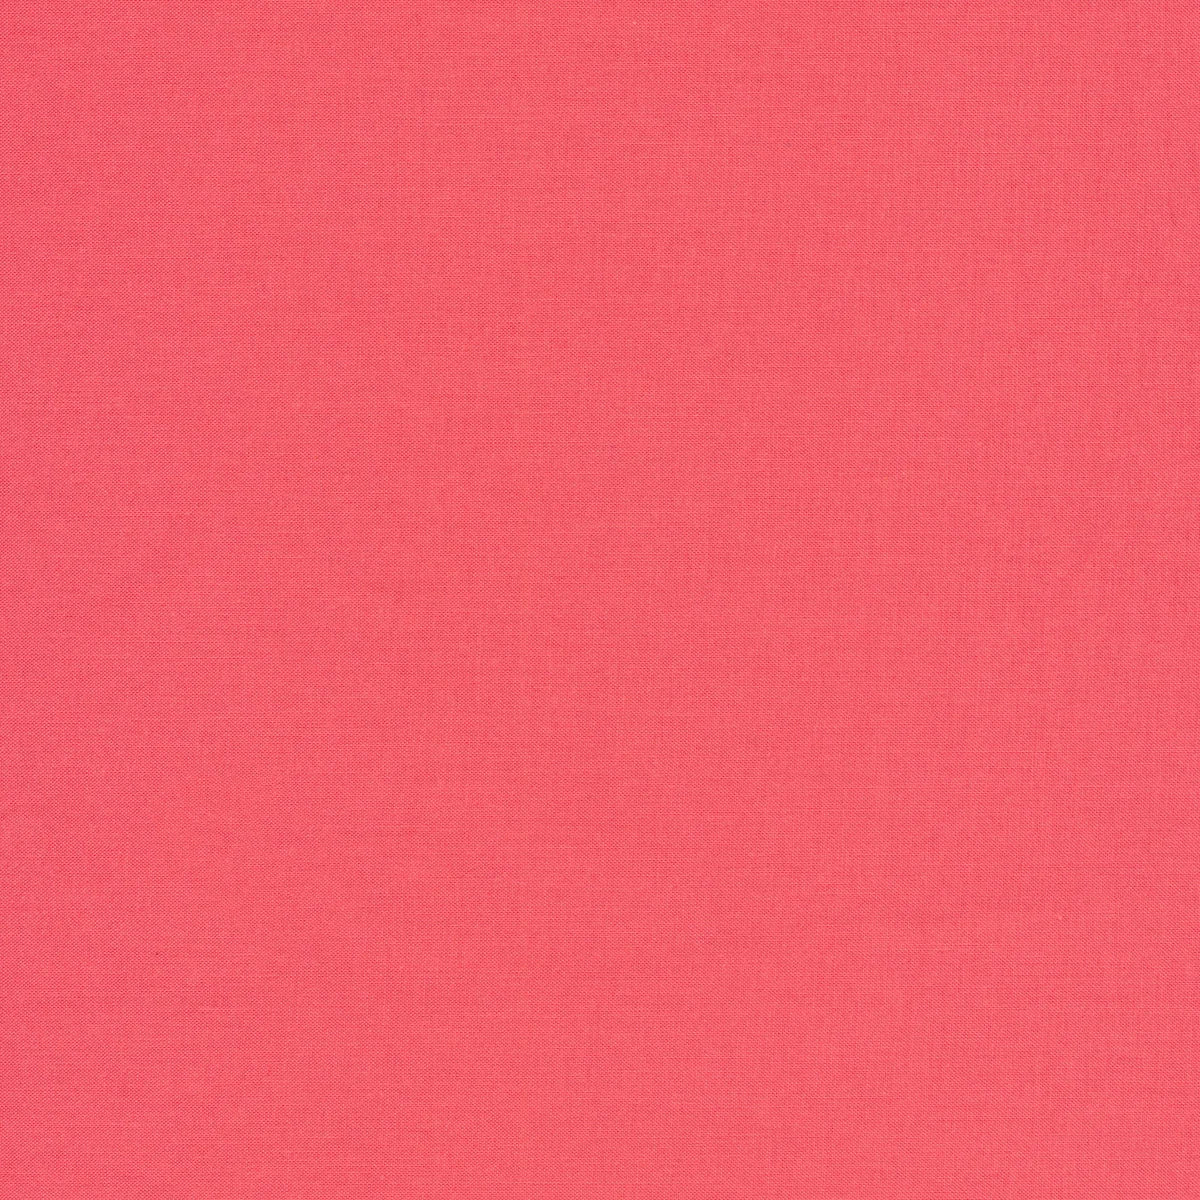 Kimberbell Silky Solids, Pink Grapefruit Fabric by the Yard